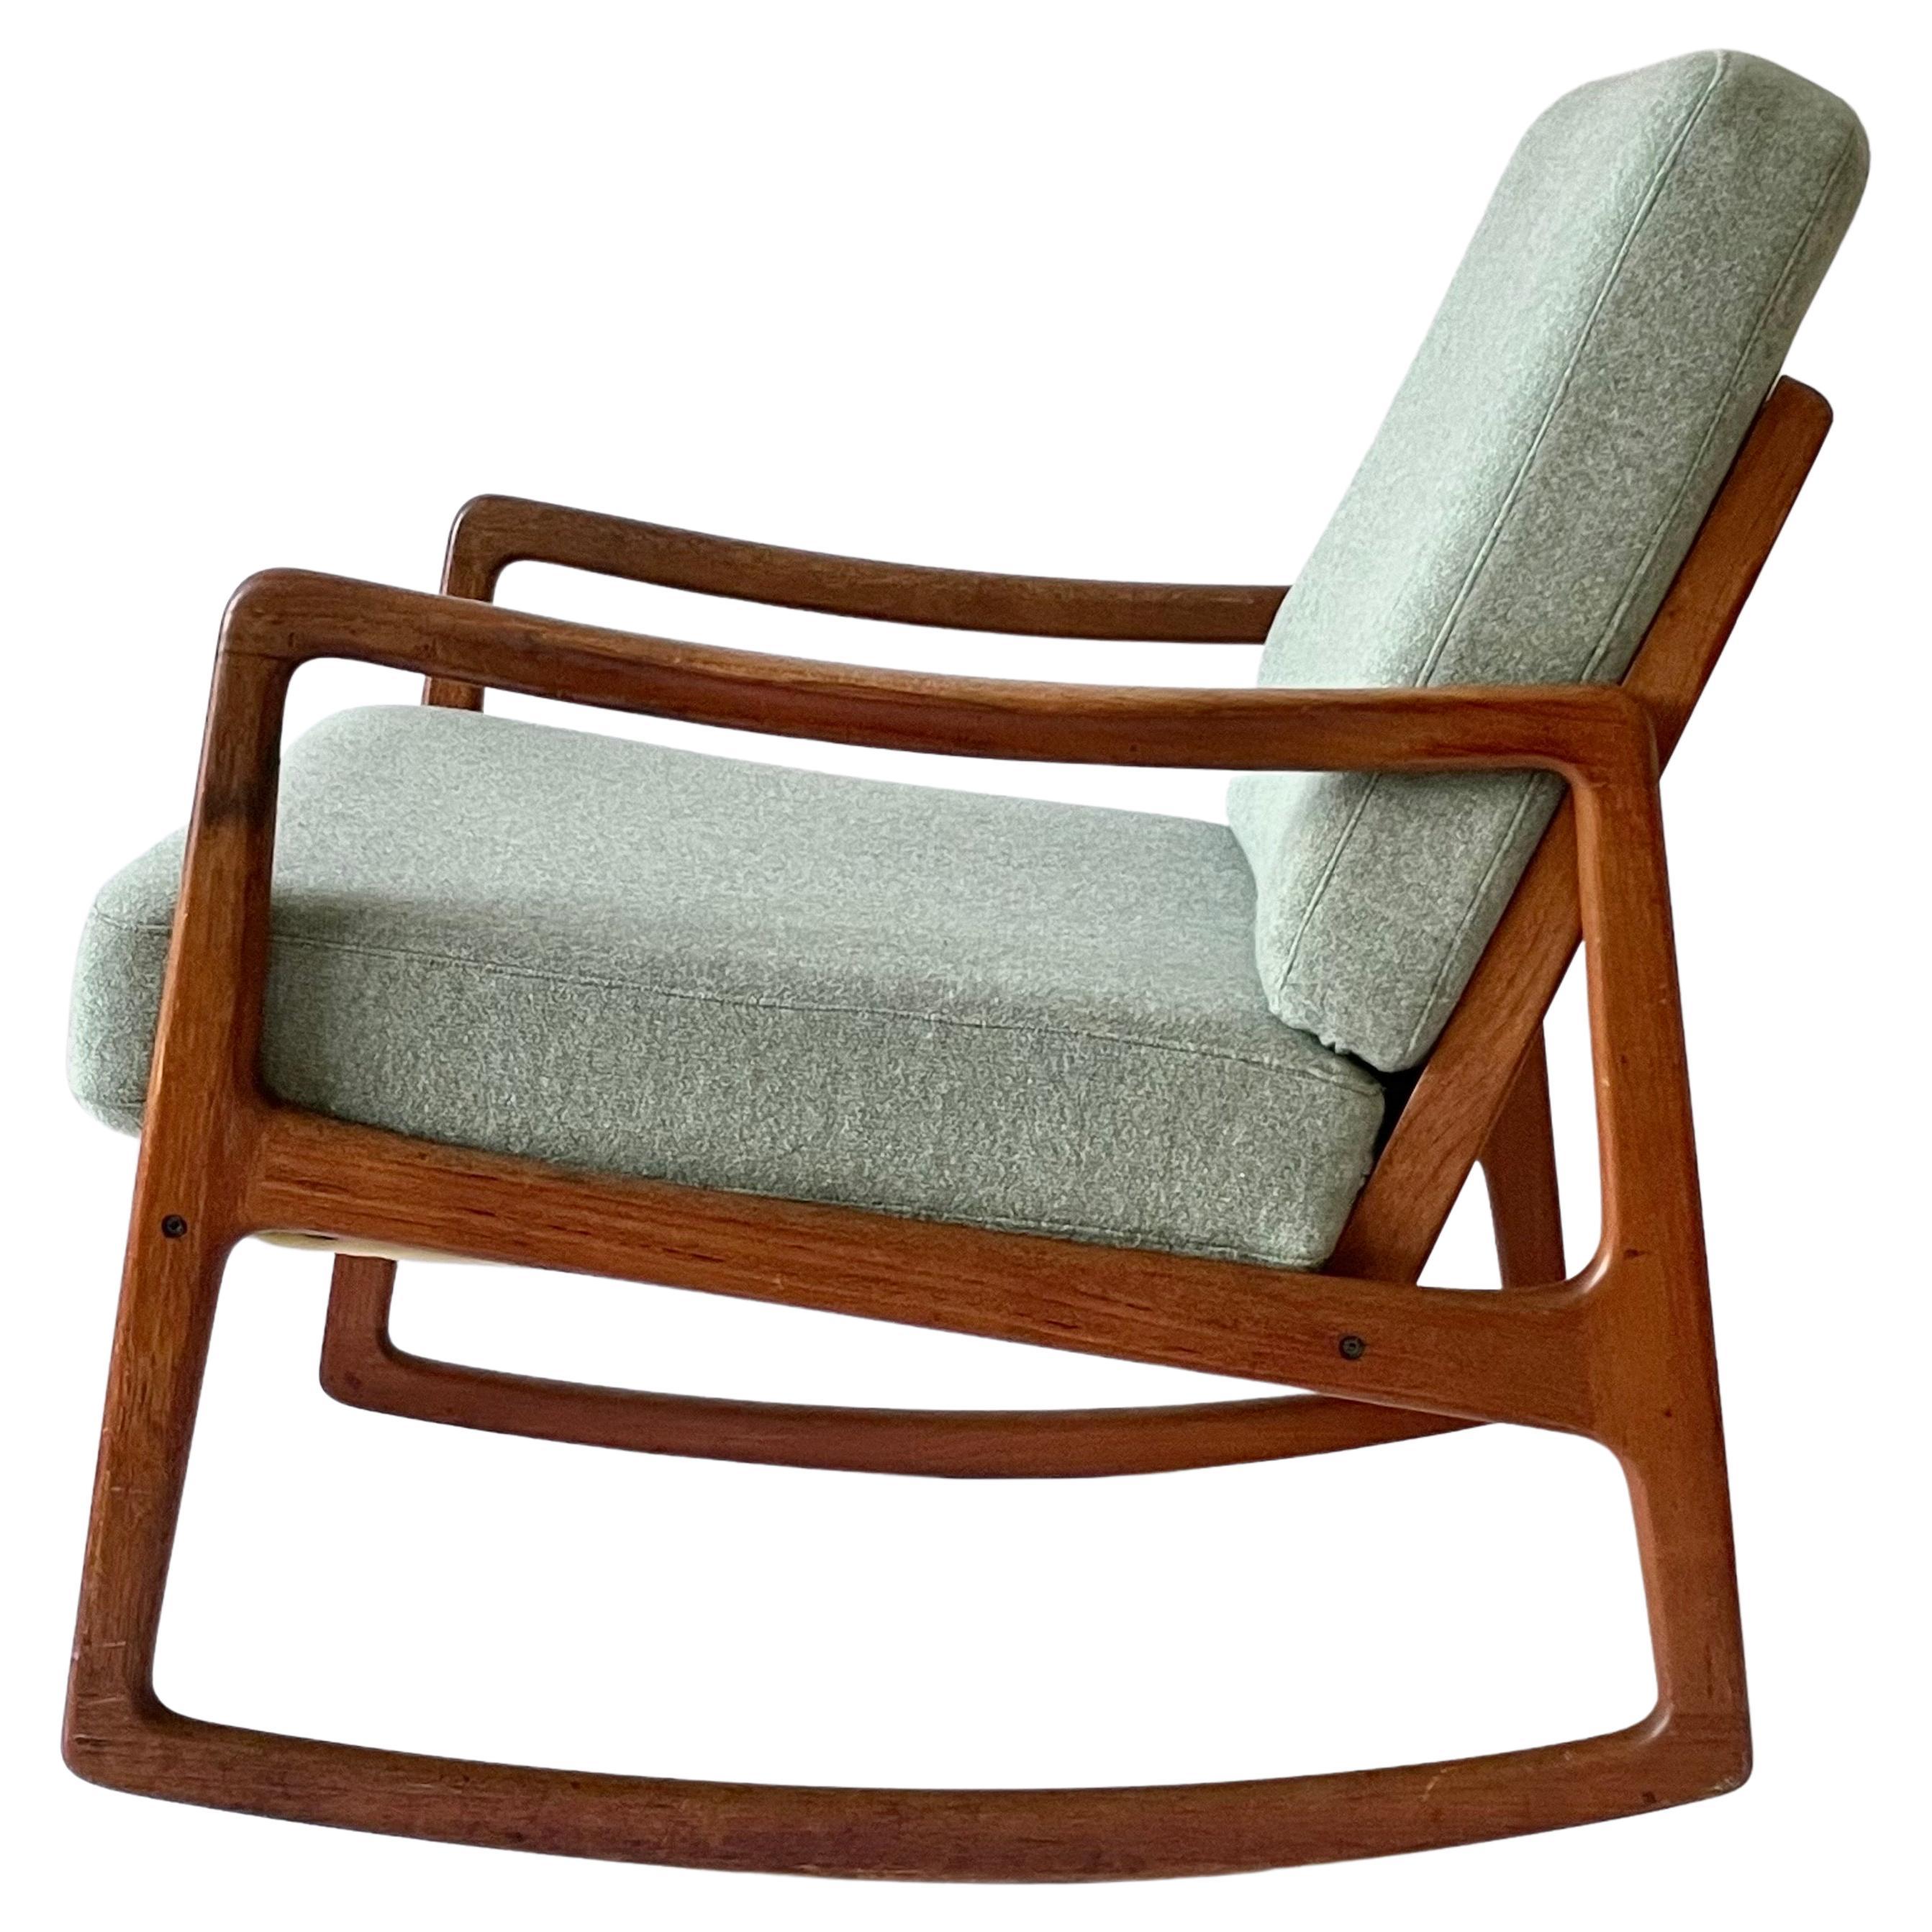 Rare mid-century rocking chair designed by Danish Professor Ole Wanscher. Made in Denmark by France & Søn during the 1950s. It maintains the manufacturer’s mark and features a sturdy teak wooden frame with a slated open back. The minimalist shape